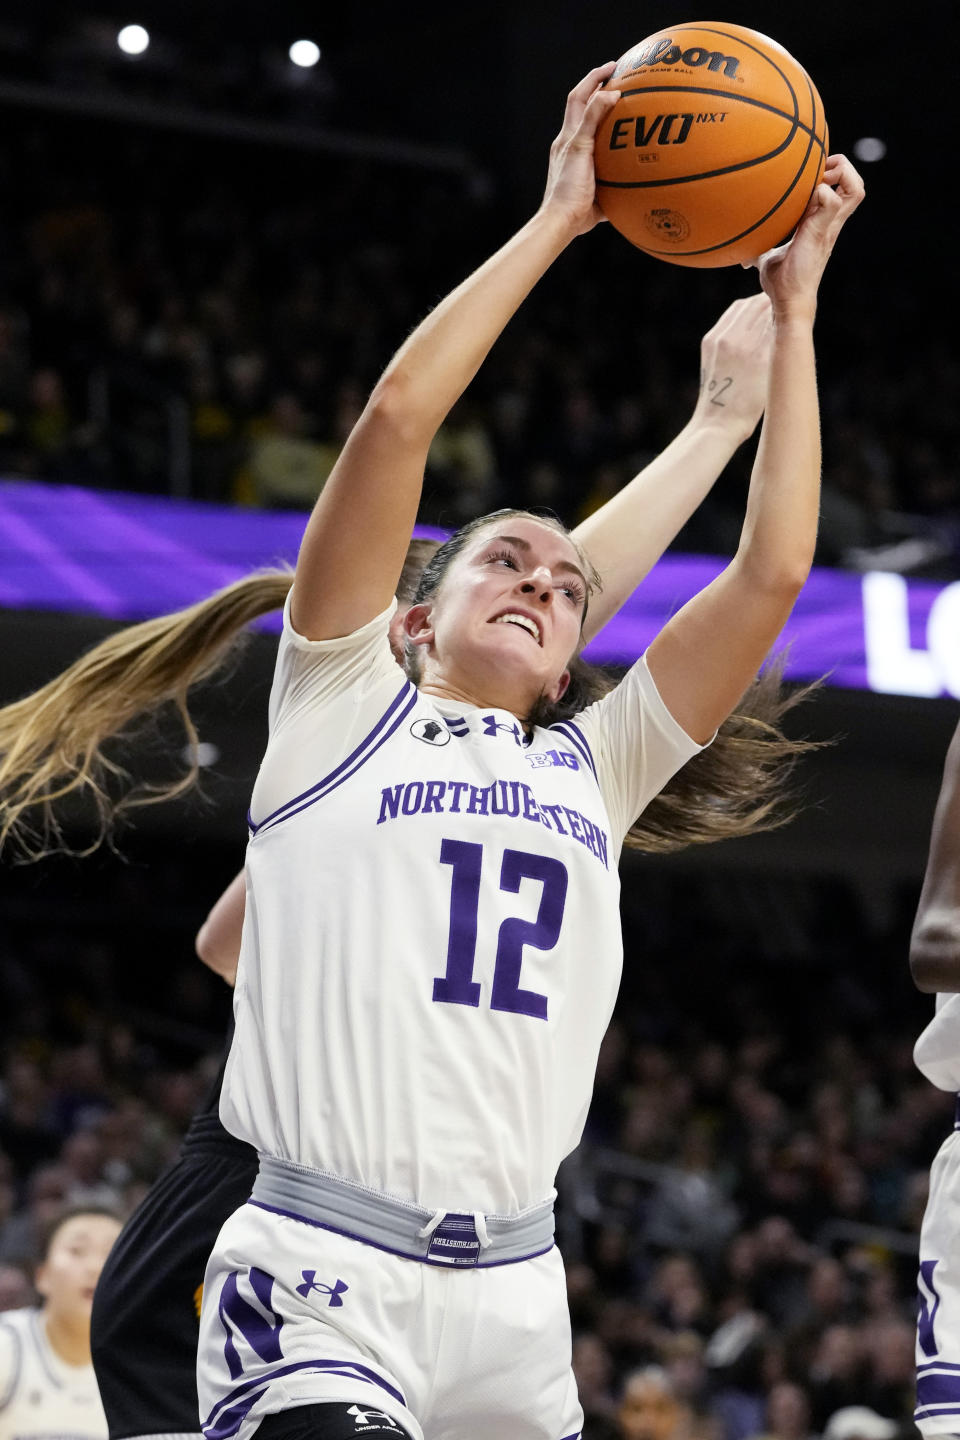 Northwestern guard Casey Harter rebounds the ball against Iowa center Sharon Goodman during the first half of an NCAA college basketball game in Evanston, Ill., Wednesday, Jan. 31, 2024. Iowa won 110-74. (AP Photo/Nam Y. Huh)